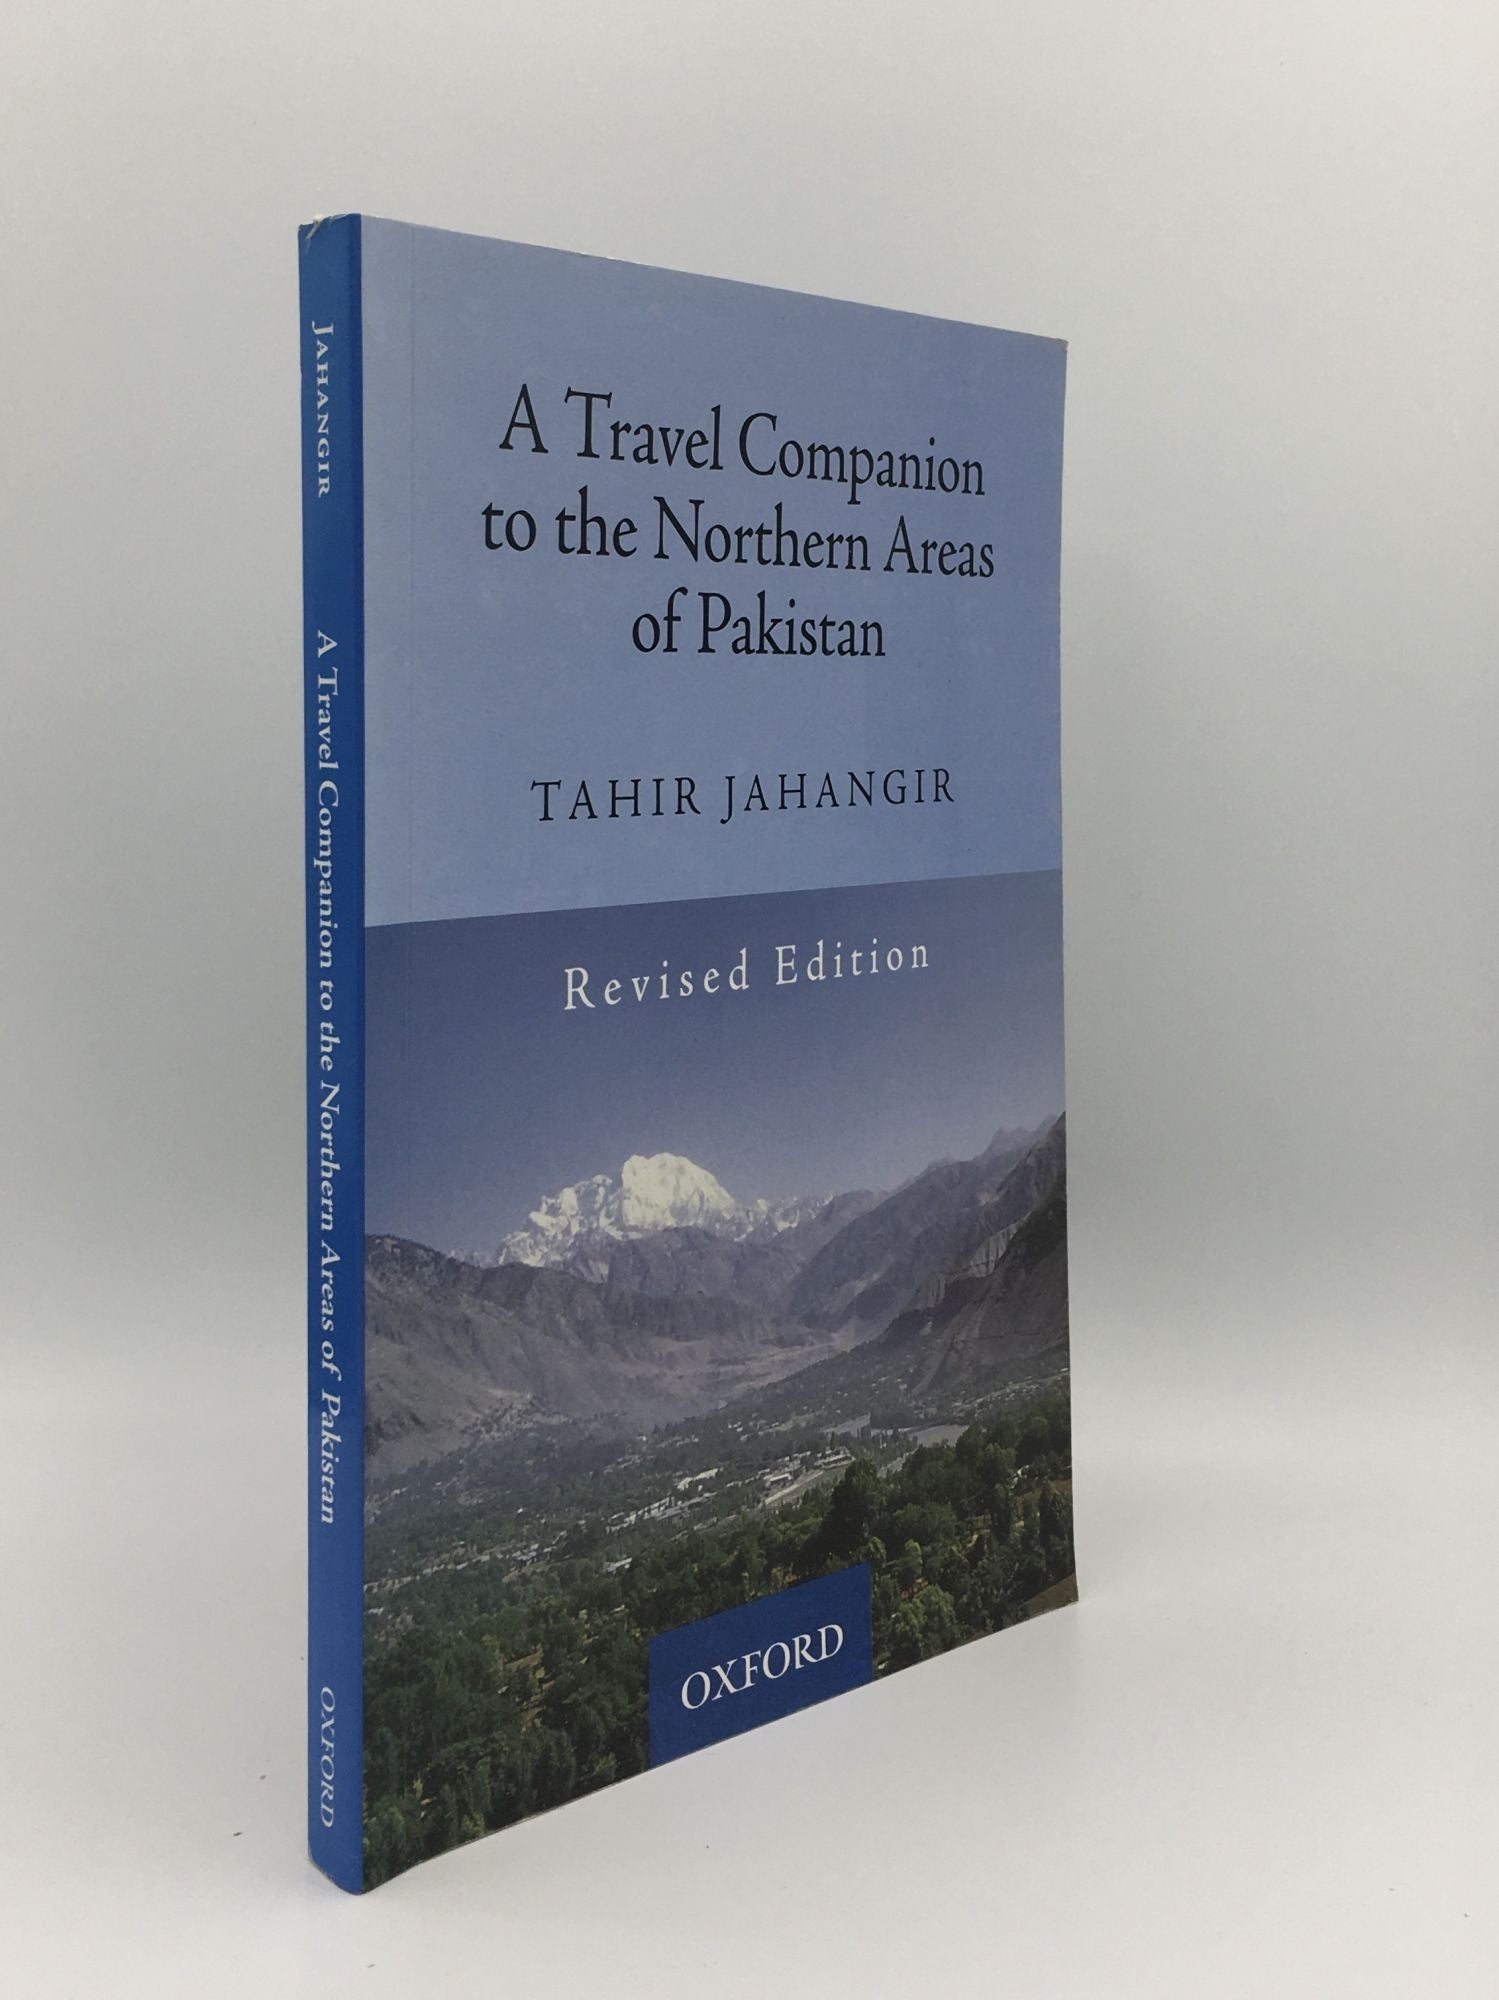 JAHANGIR Tahir - A Travel Companion to the Northern Areas of Pakistan Revised Edition